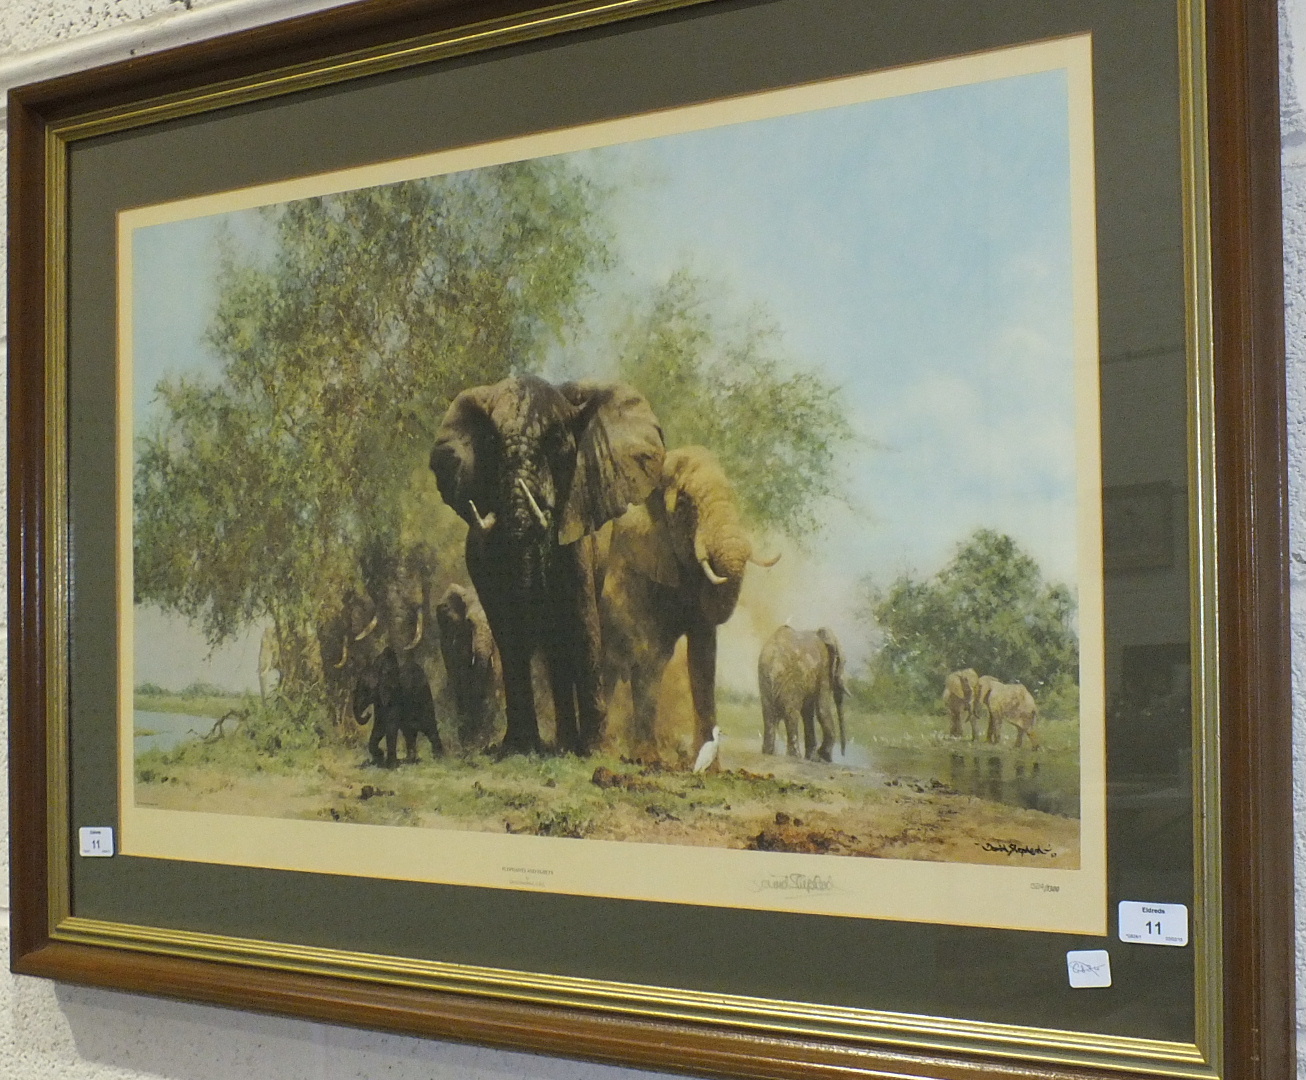 After David Shepherd, 'Elephants and Egrets', a limited edition coloured print, 47 x 78.5cm,